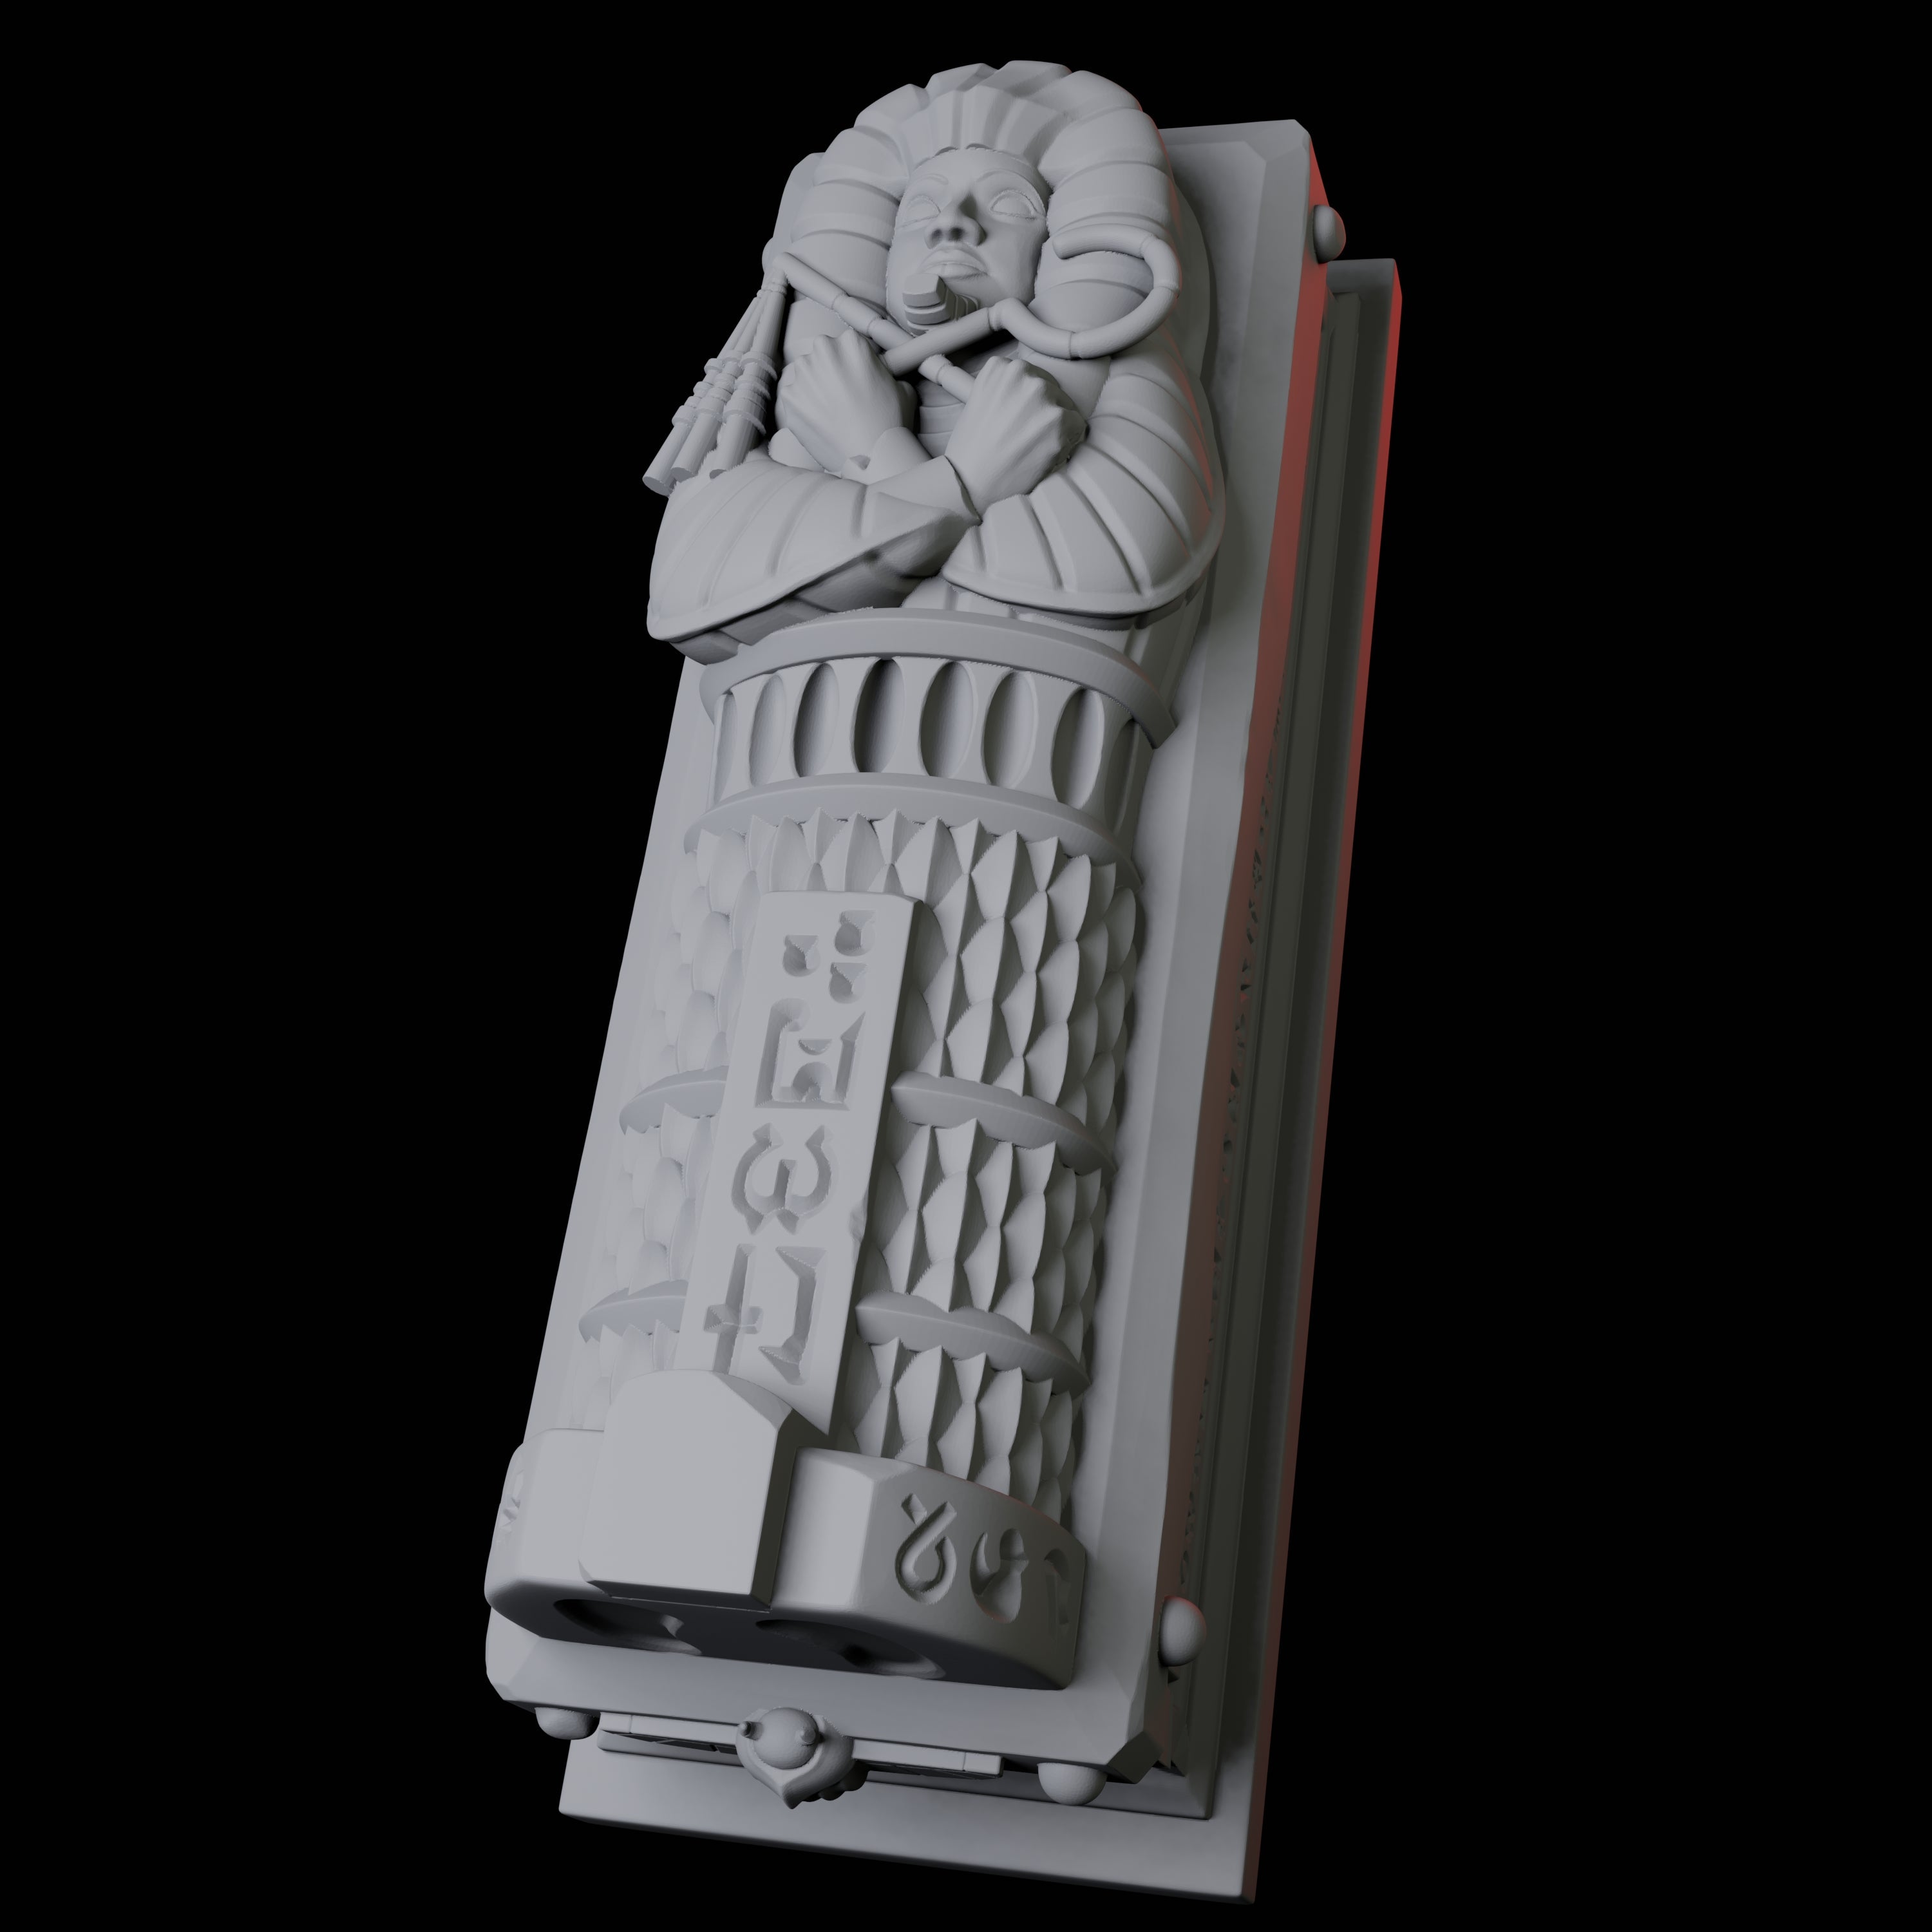 Ancient Egyptian Sarcophagus Miniature for Dungeons and Dragons, Pathfinder or other TTRPGs